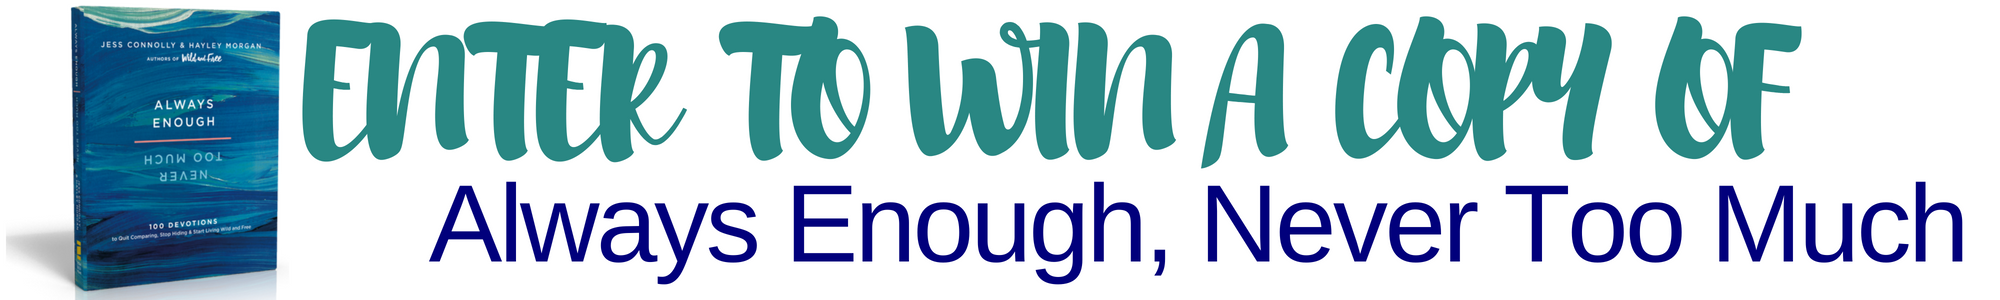 Win 1 of 5 Copies of Always Enough, Never Too Much'. 'Always Enough, Never Too Much' devotional